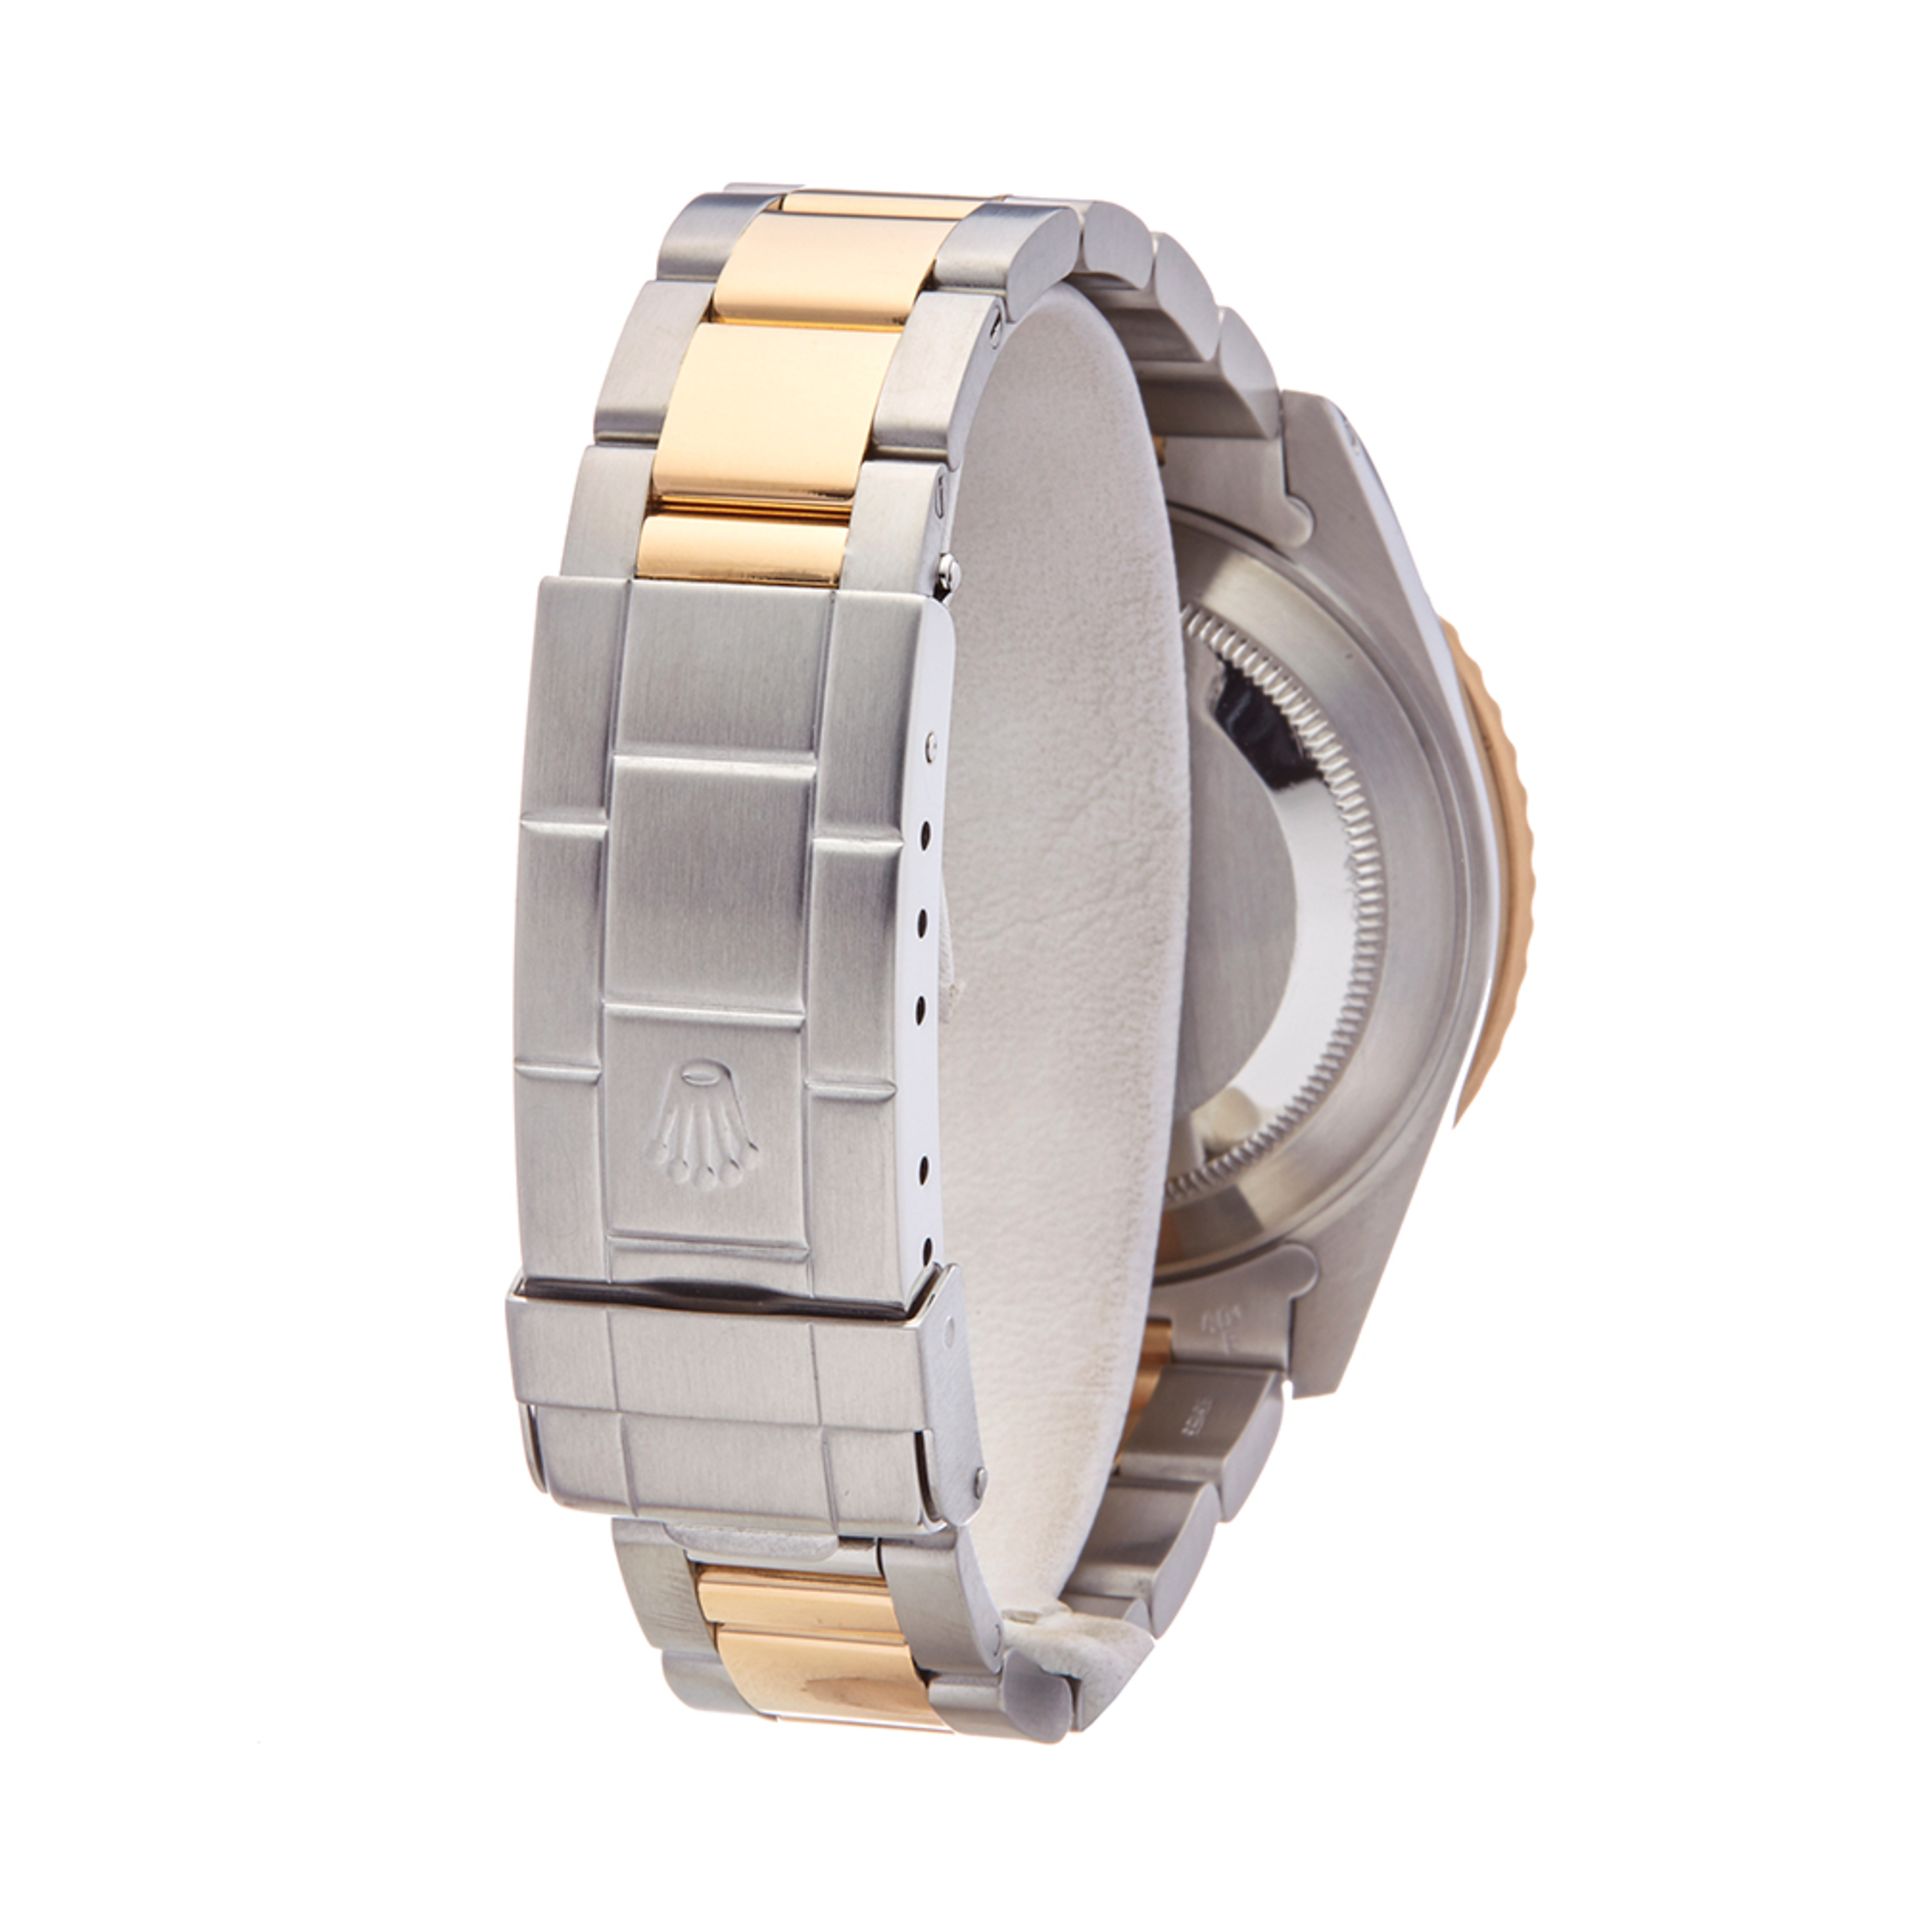 Submariner 40mm Stainless Steel & 18K Yellow Gold - 16613 - Image 6 of 8